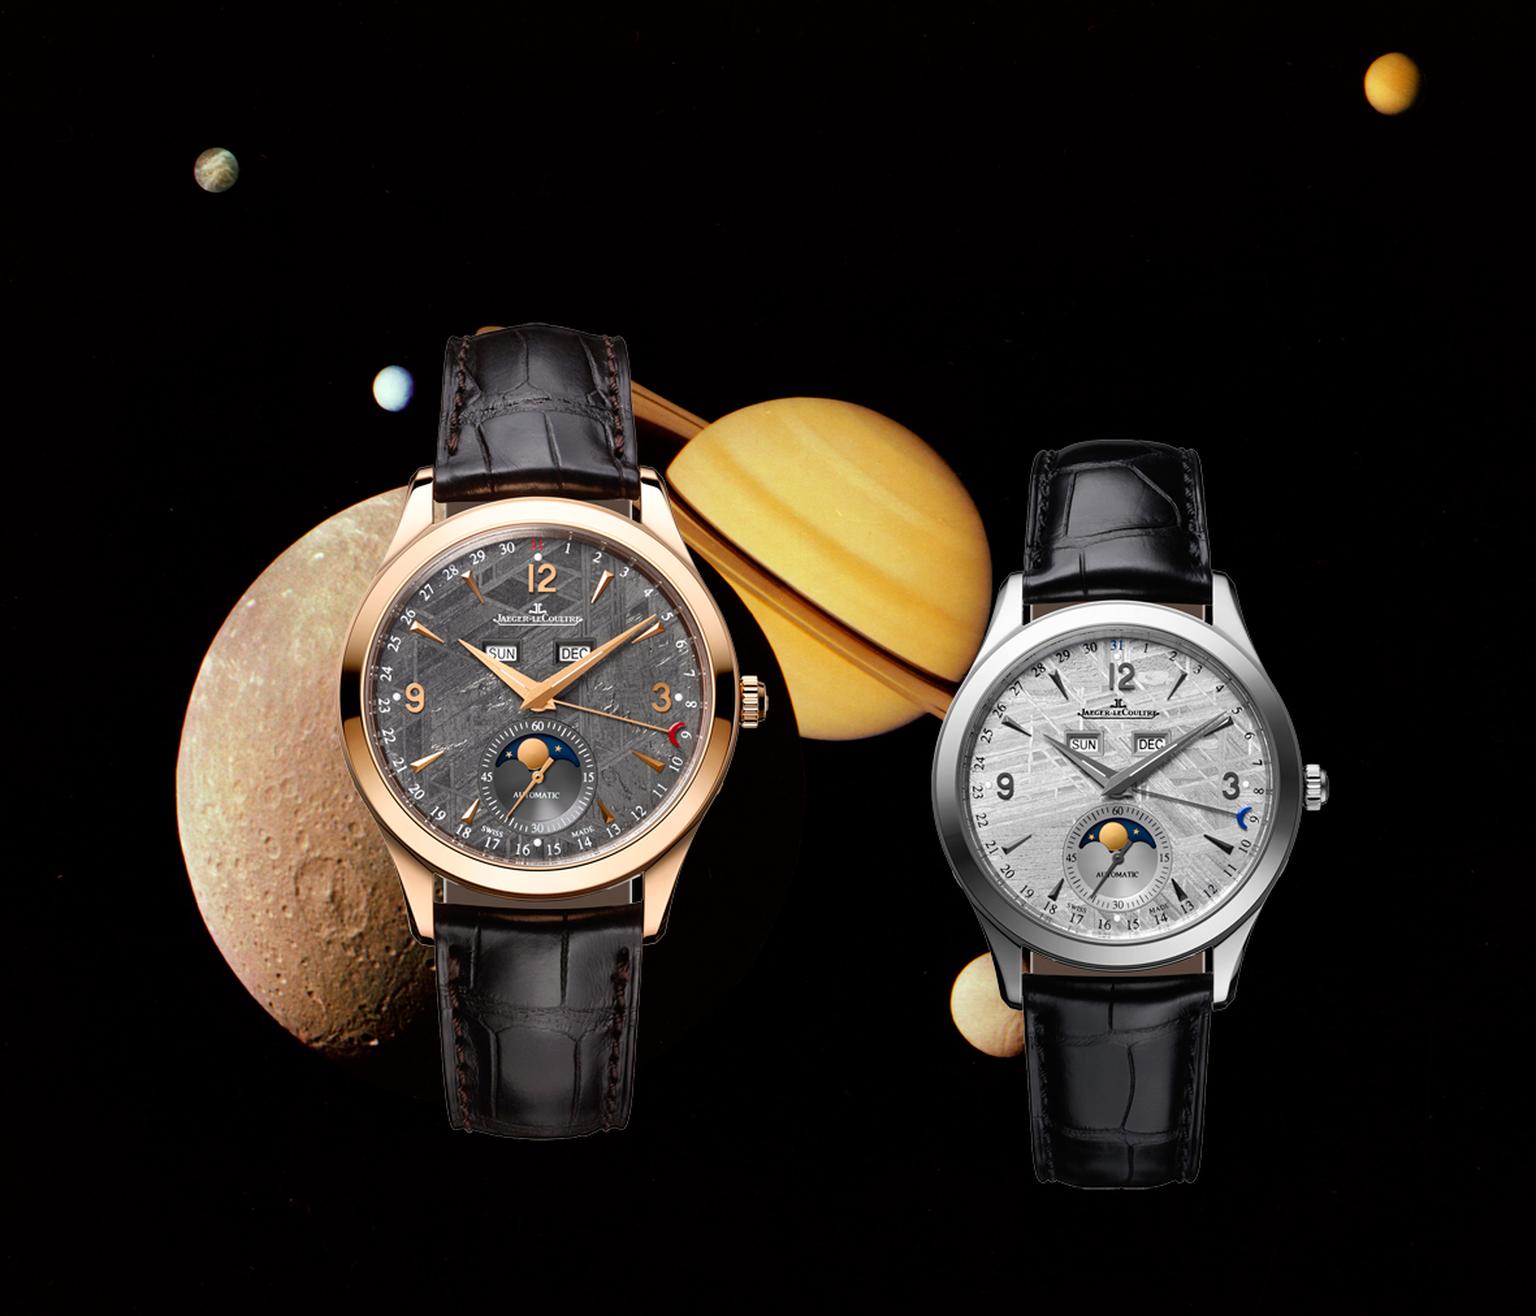 Jaeger-LeCoultre watches kicks off the watch season with a timepiece that is literally from outer space. Its classic Master Calendar watch sports a 100-million-year-old dial sliced from a single block of meteorite that was discovered in Sweden.